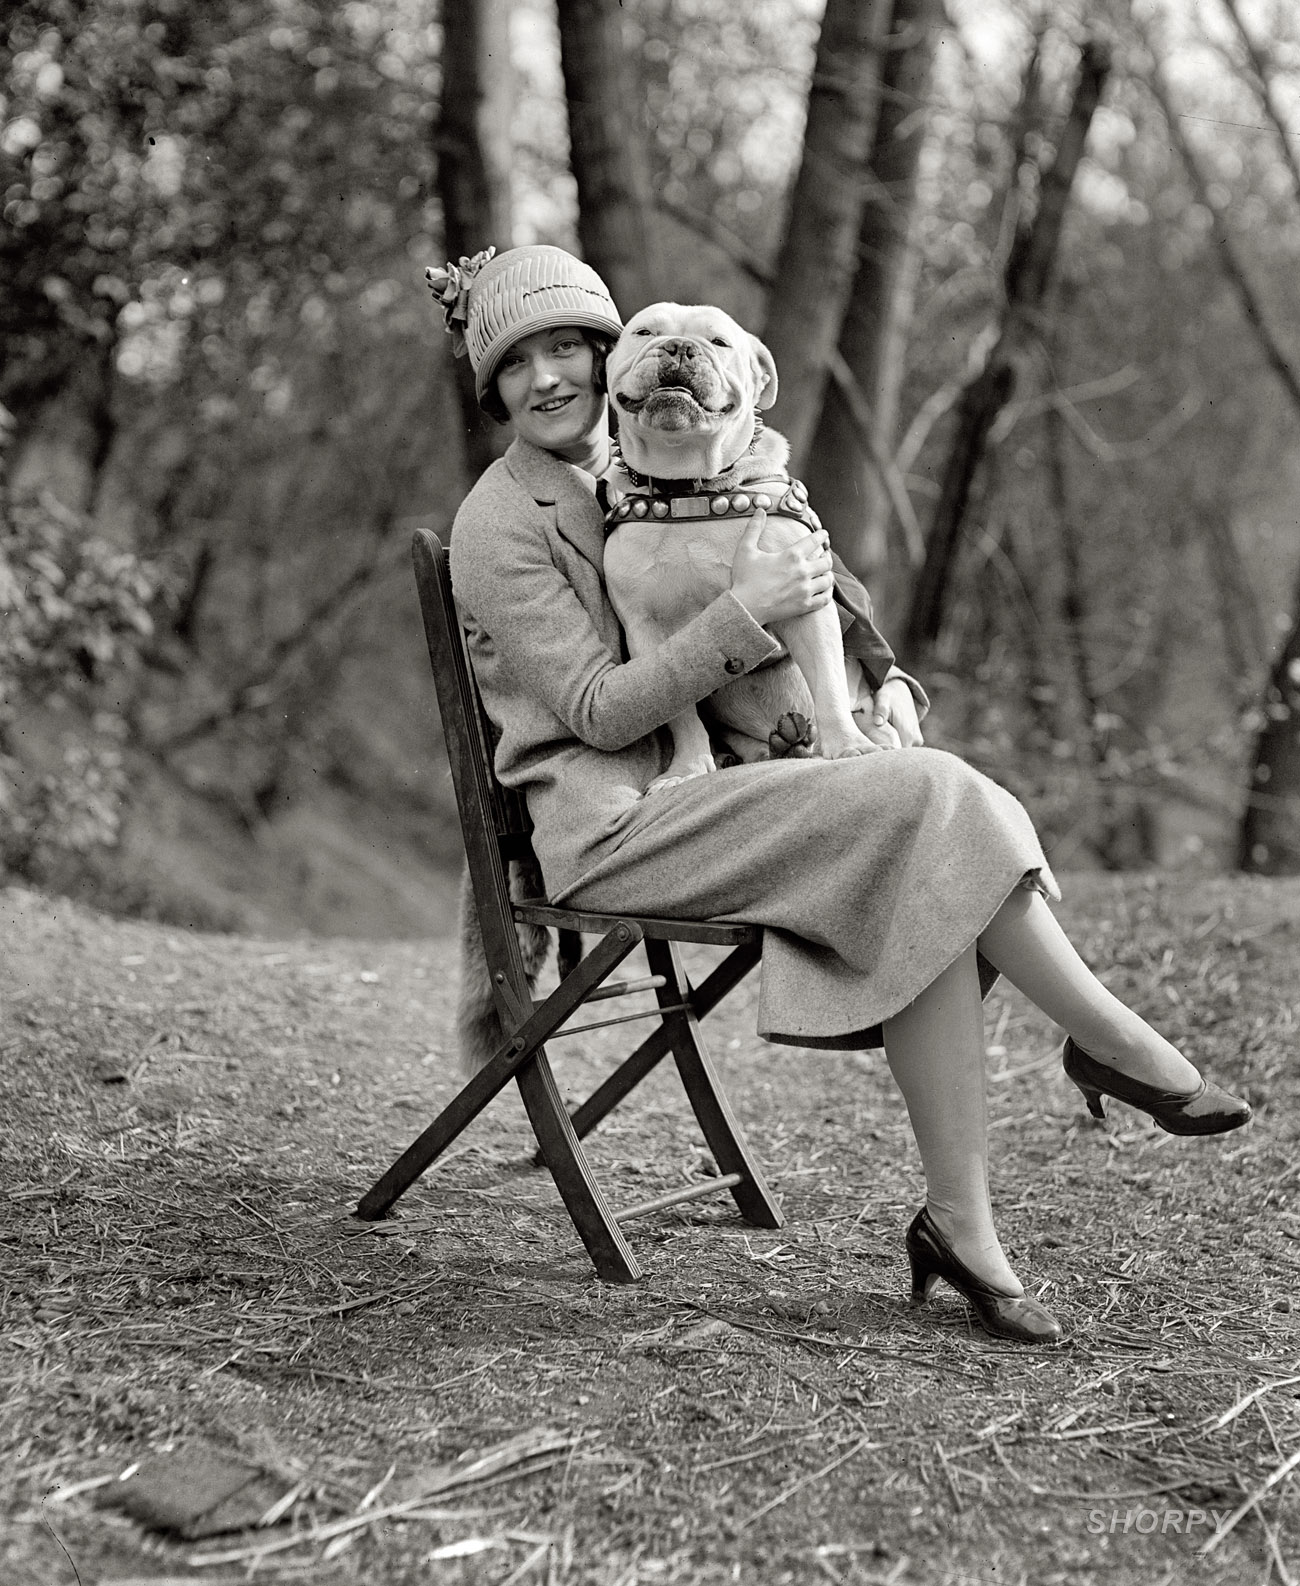 April 14, 1925. Washington, D.C. "Miss Mae Esterly with Sgt. Jiggs." National Photo Company Collection glass negative. View full size.